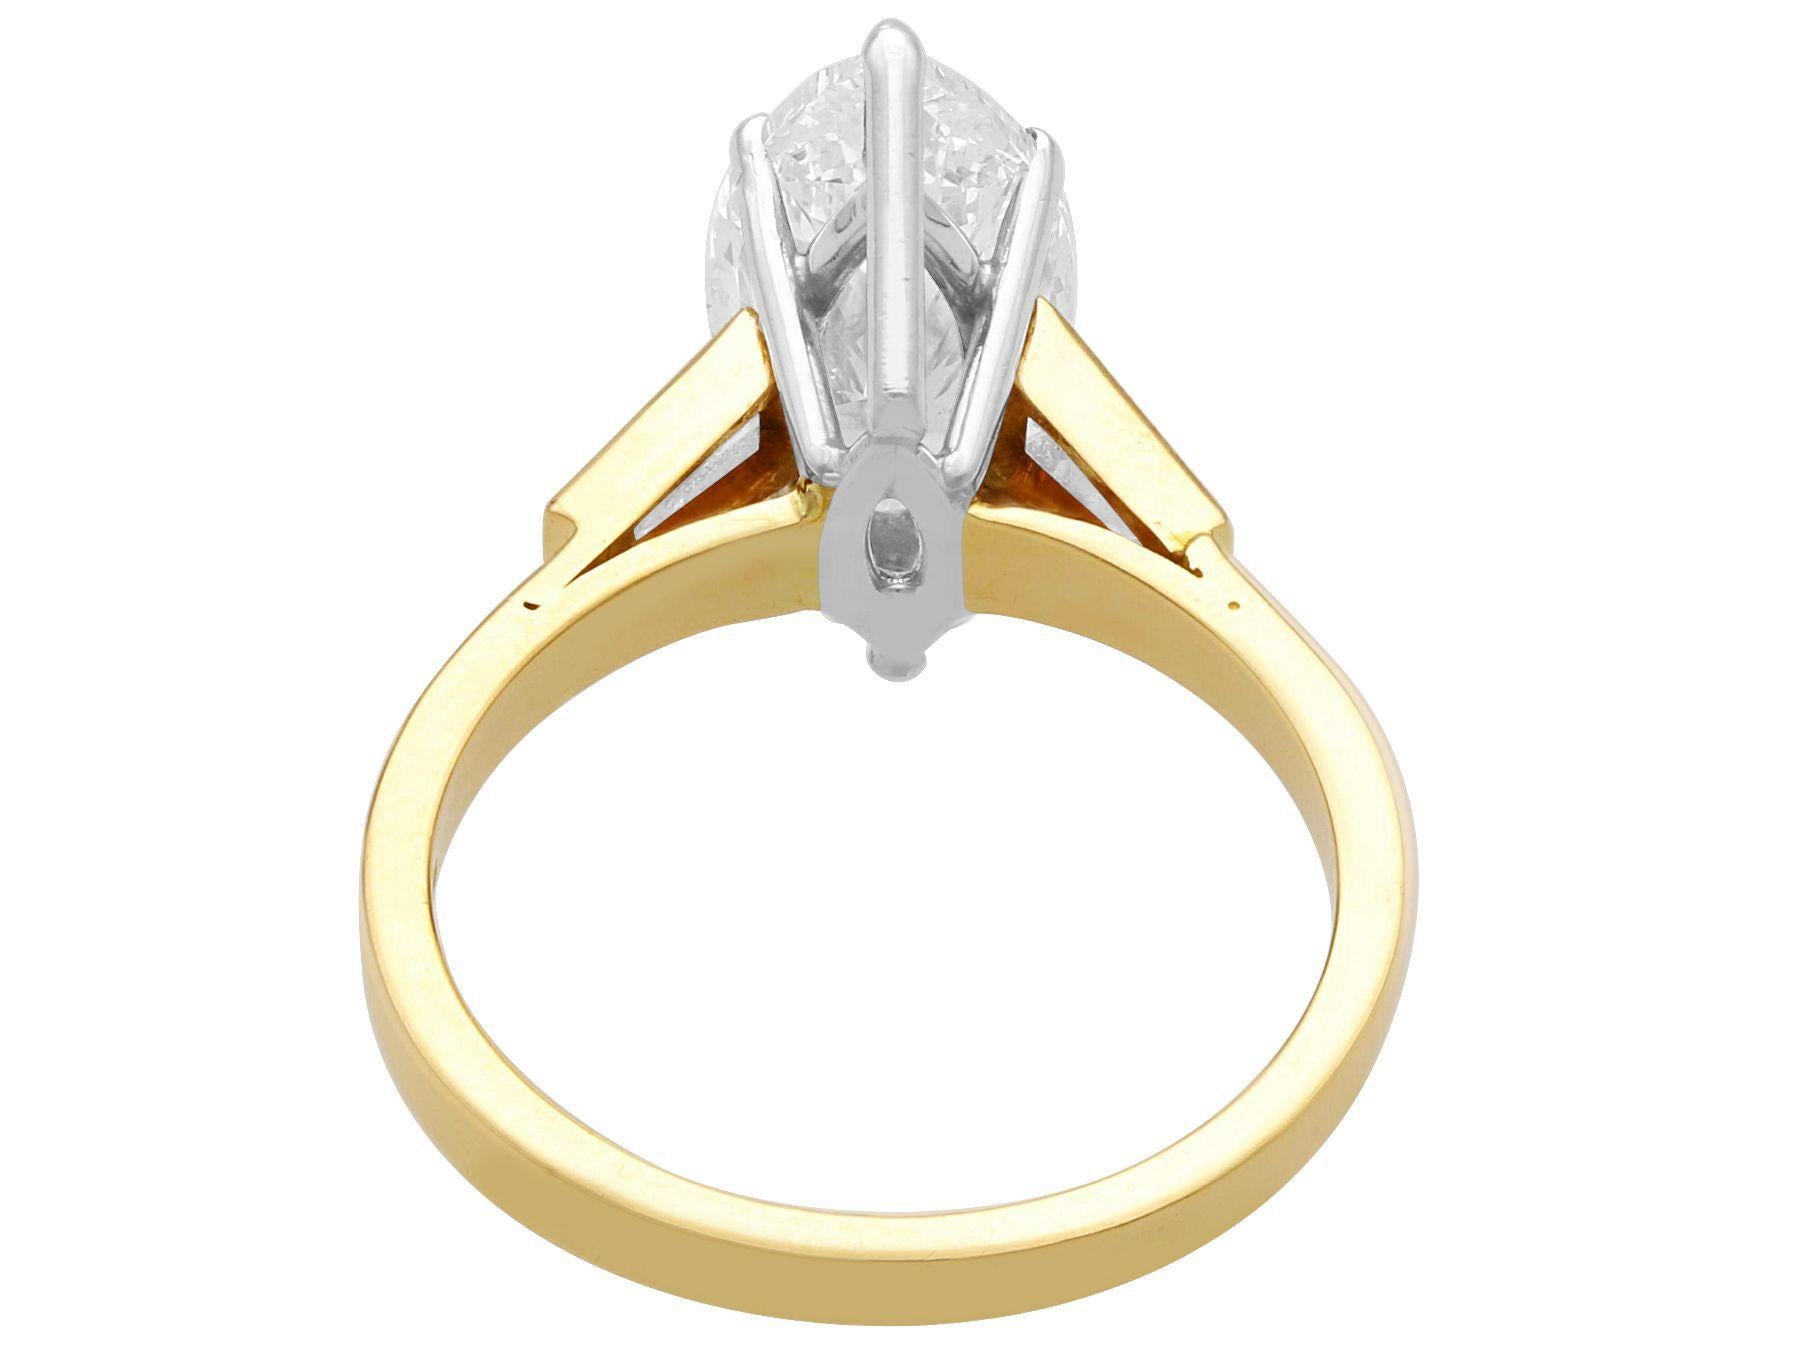 Vintage 2.92 Carat Diamond and Yellow Gold Solitaire Ring In Excellent Condition For Sale In Jesmond, Newcastle Upon Tyne